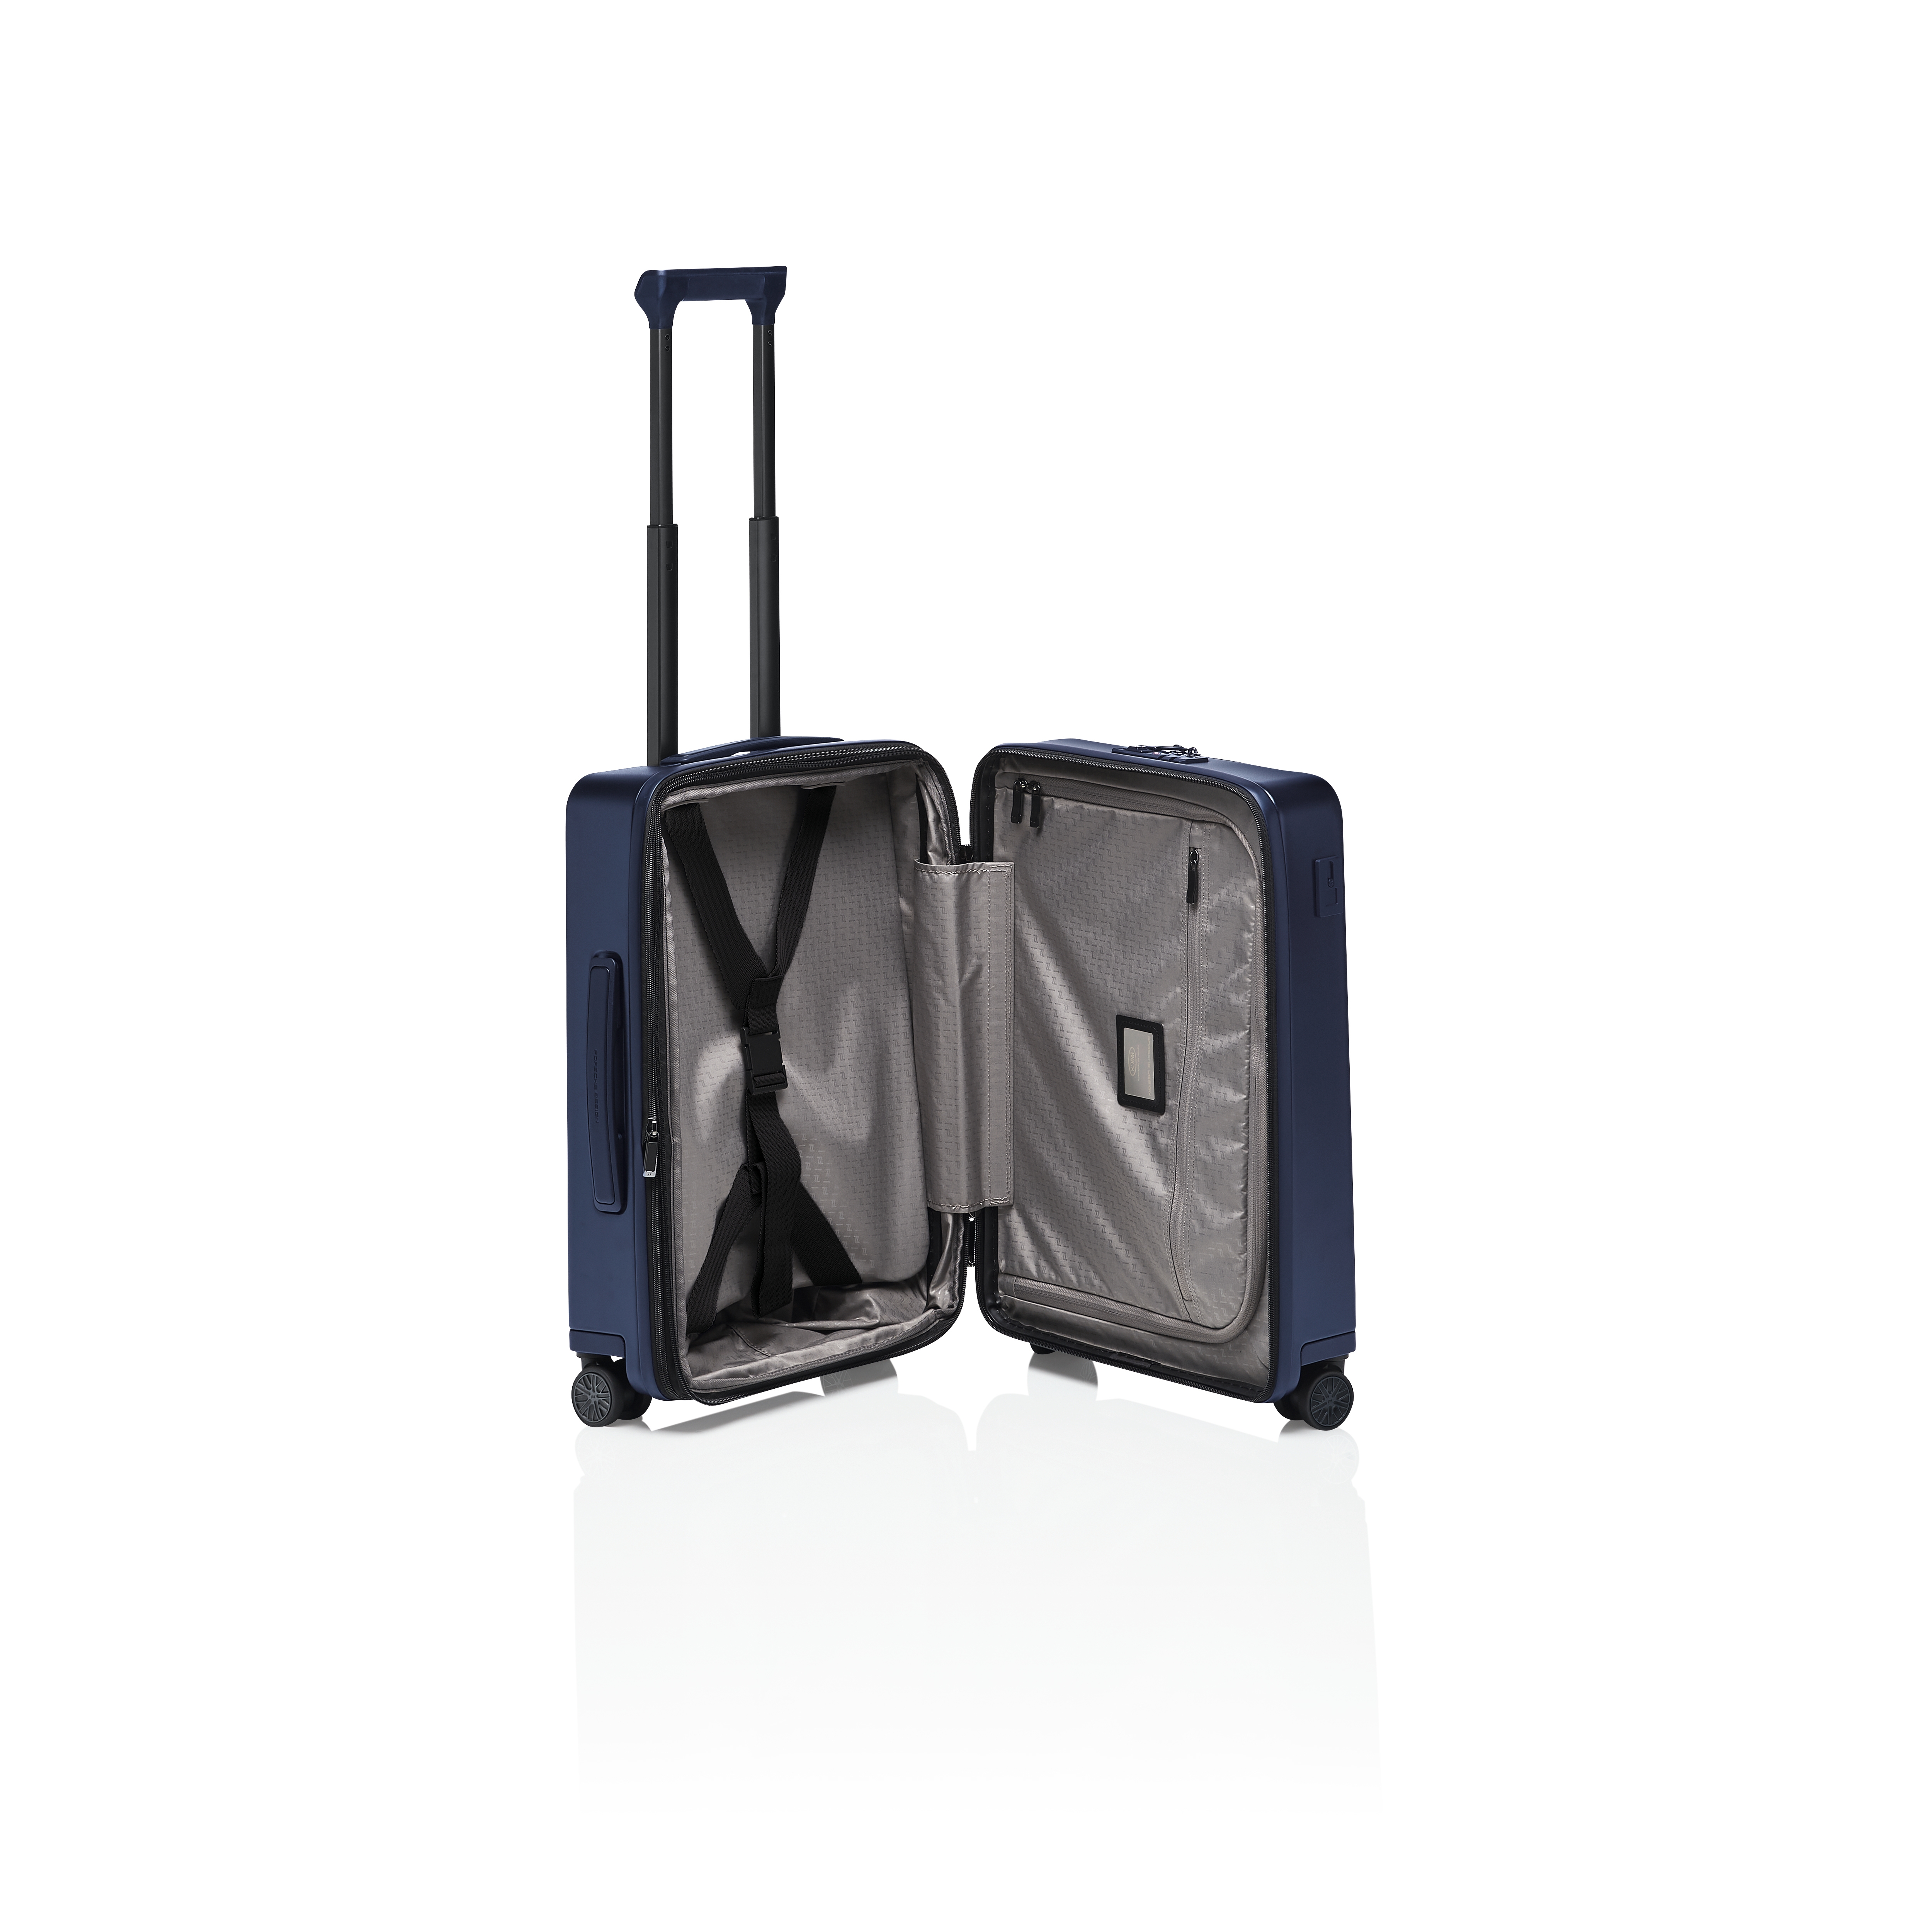 Womens Bags Luggage and suitcases Porsche Design Ori05501 4 Wheel Small Business Trolley in Black 